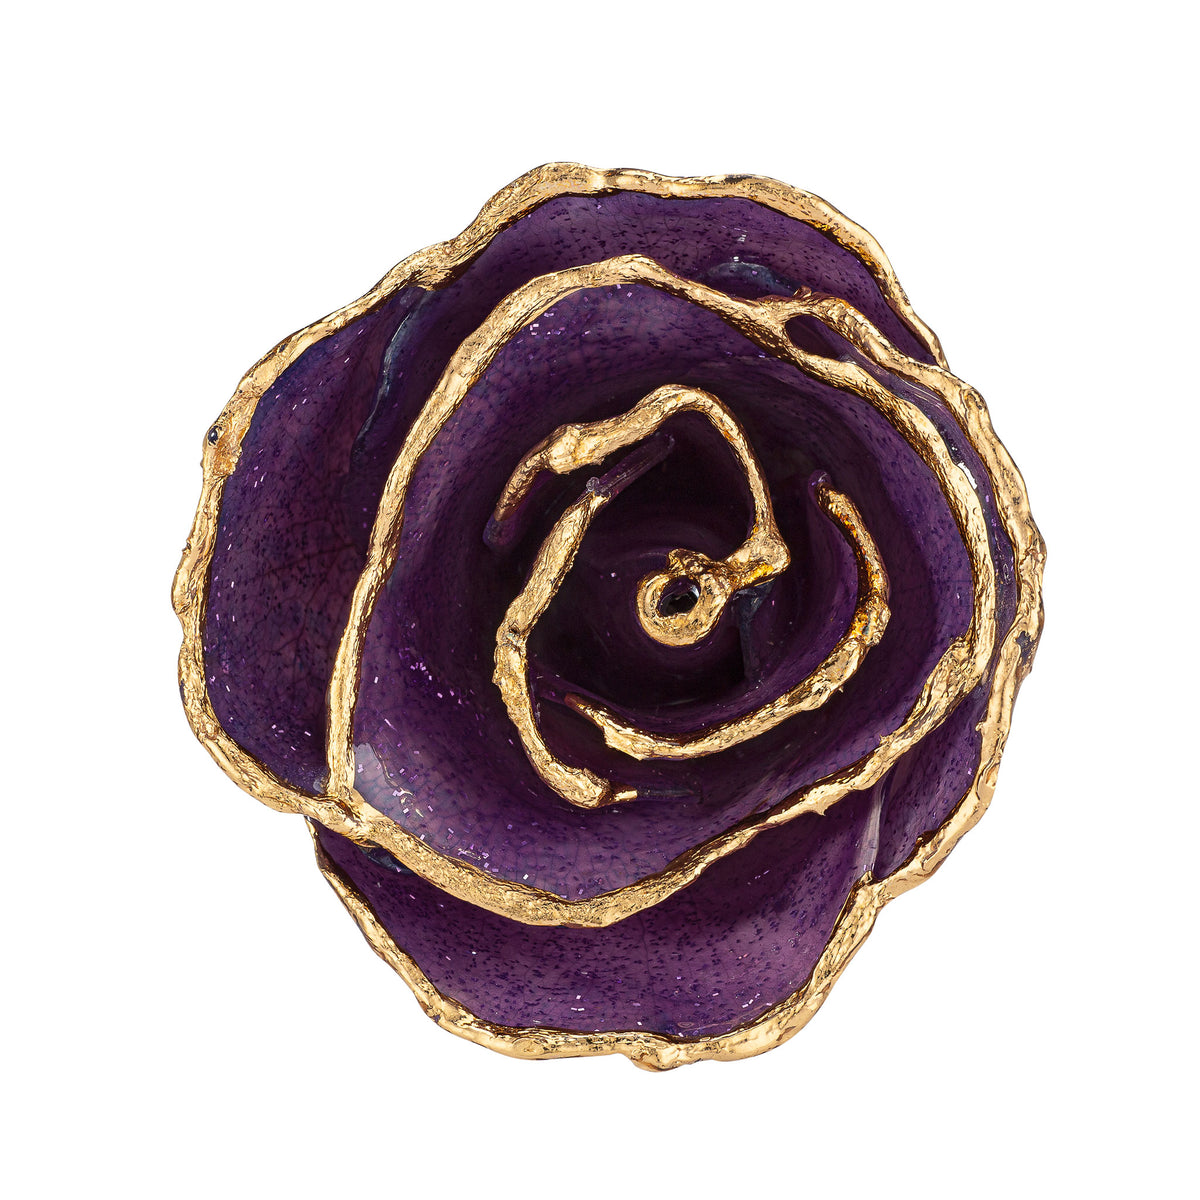 24K Gold Trimmed Forever Rose with Amethyst (purple color) with sparkles suspended in the finish. View of Stem, Leaves, and Rose Petals and Showing Detail of Gold